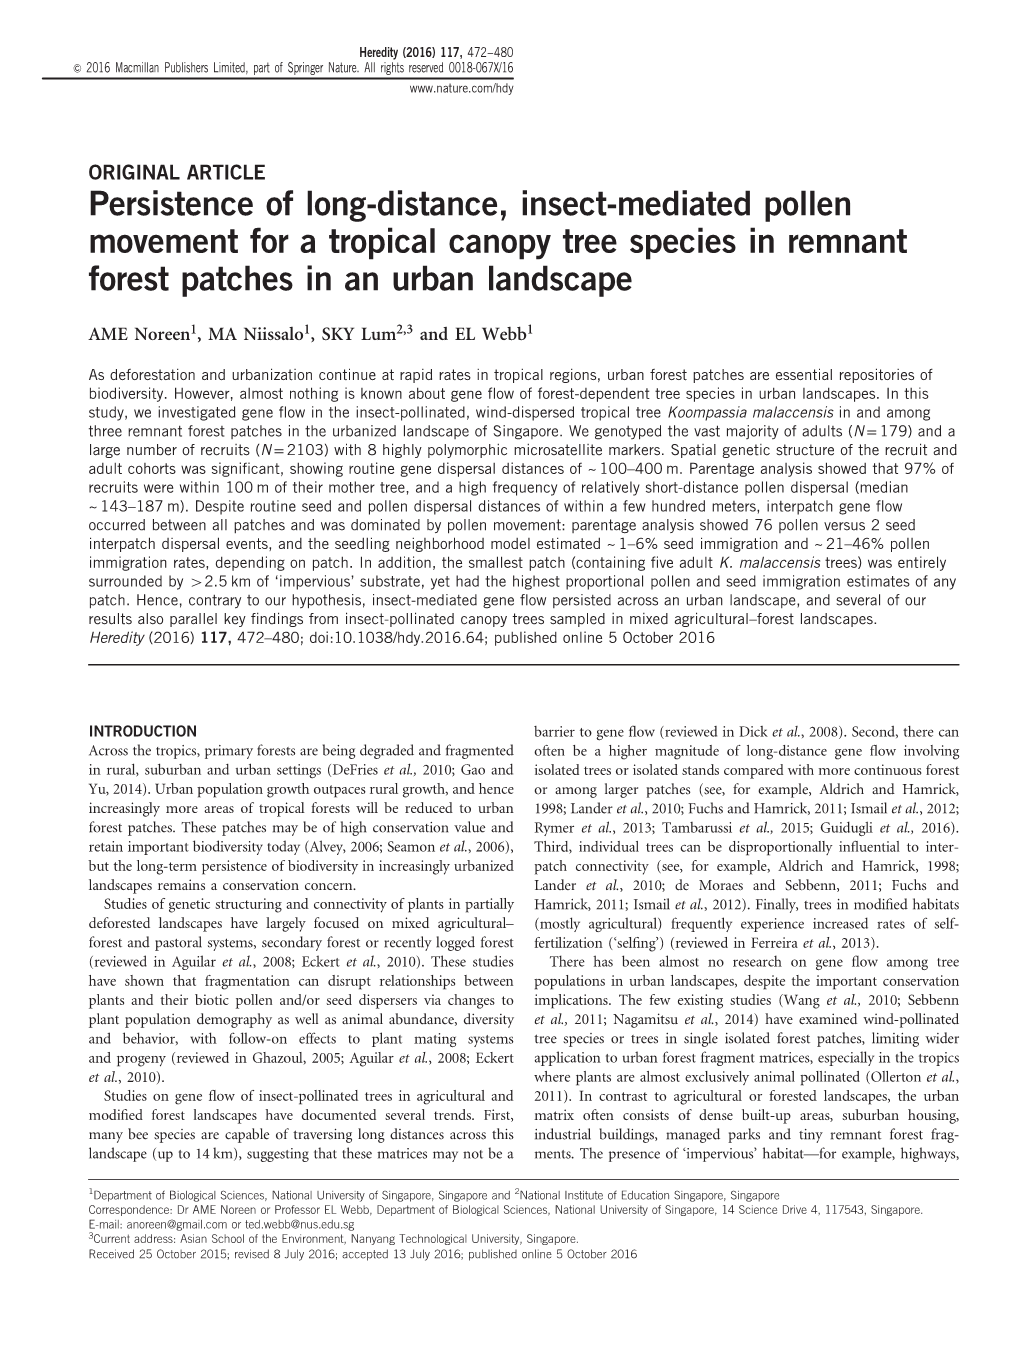 Persistence of Long-Distance, Insect-Mediated Pollen Movement for a Tropical Canopy Tree Species in Remnant Forest Patches in an Urban Landscape